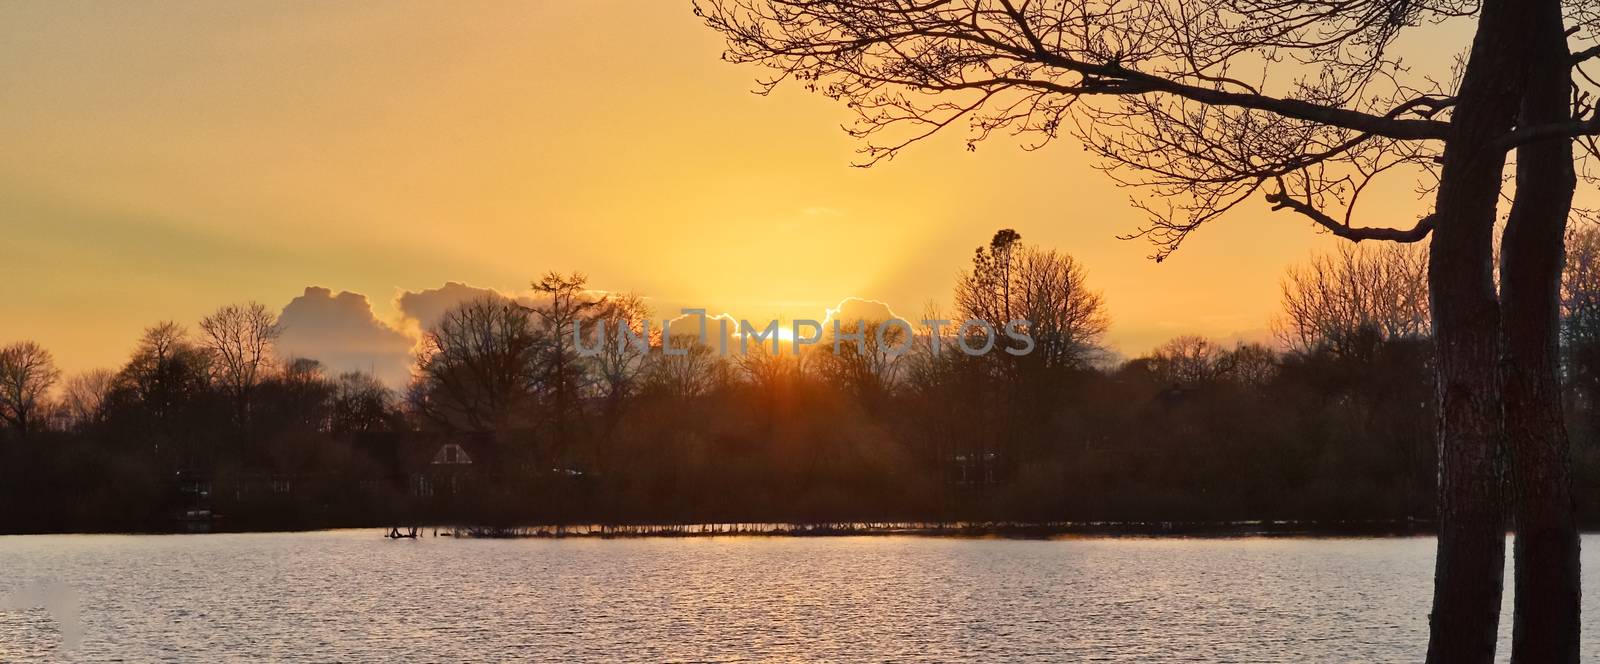 Beautiful and romantic sunset at a lake in yellow and orange col by MP_foto71